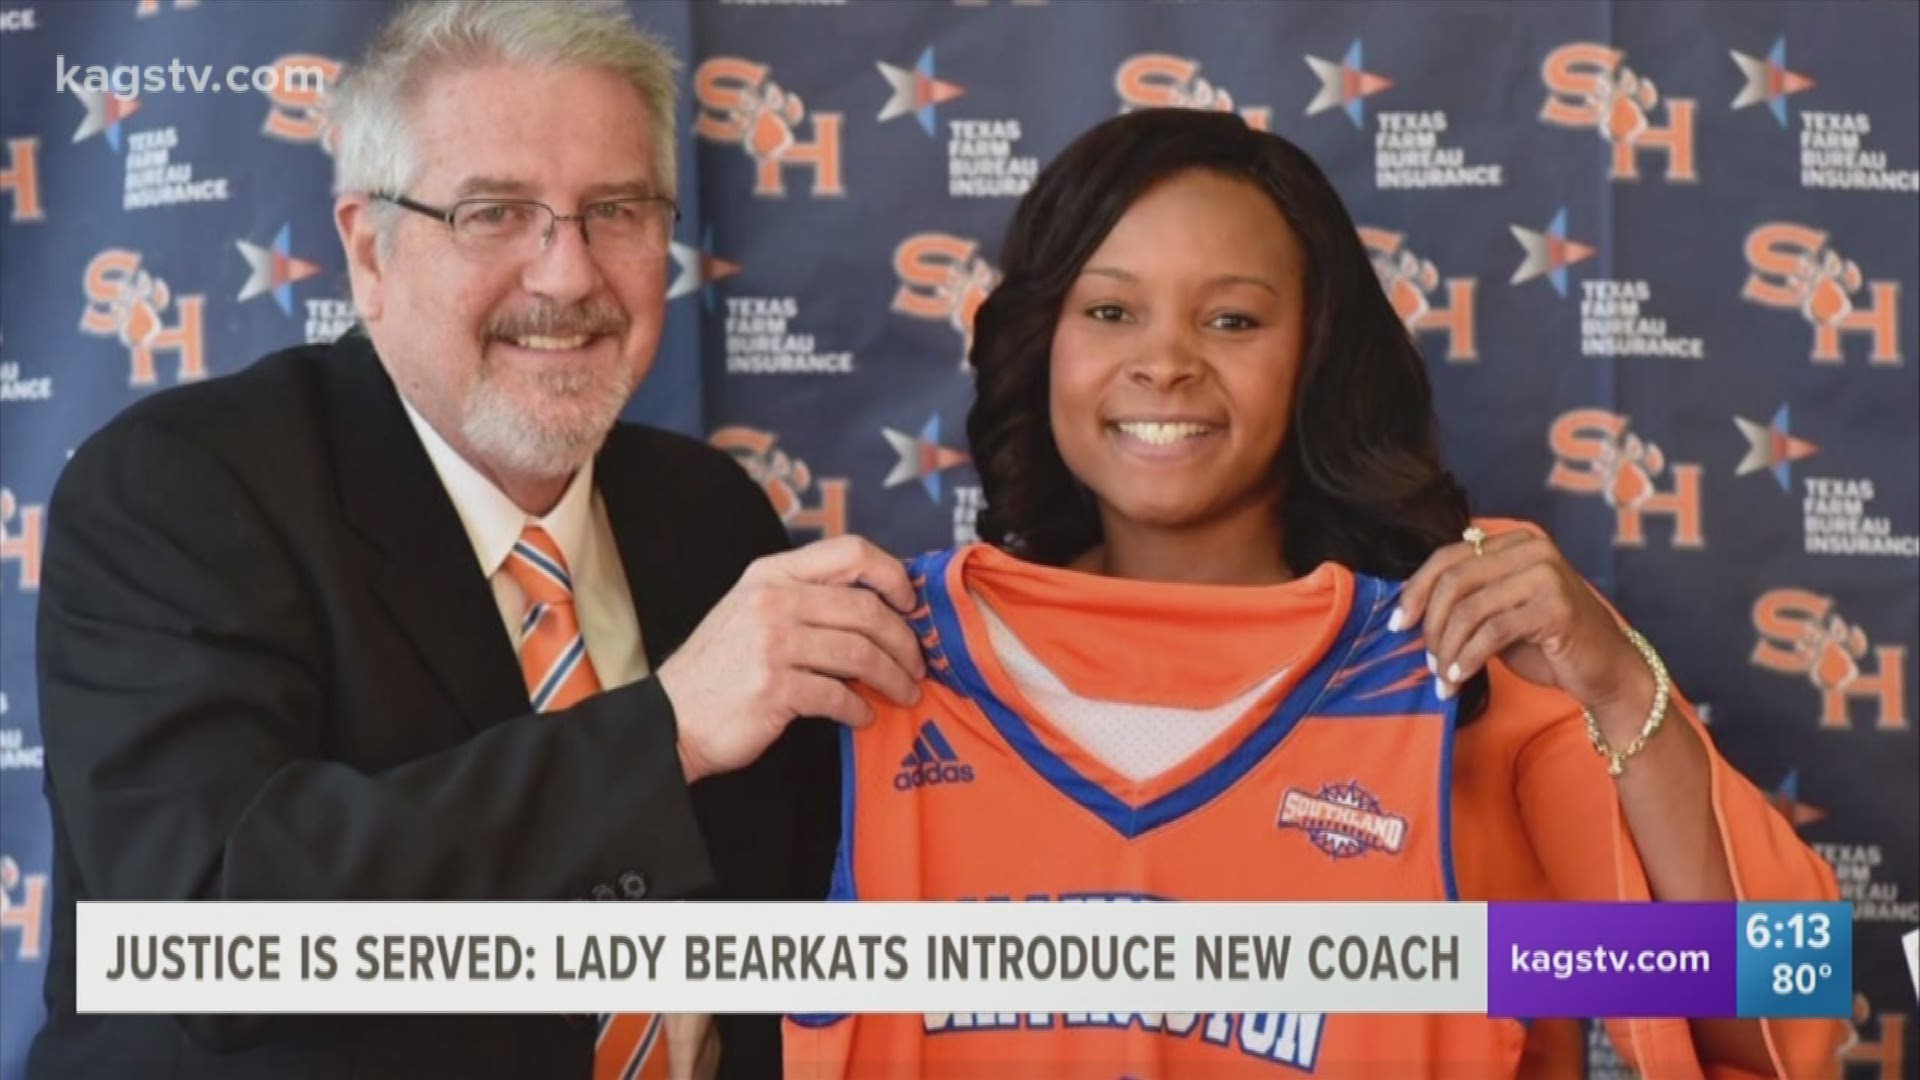 Sam Houston State named Ravon Justice its new women's basketball coach on Tuesday.